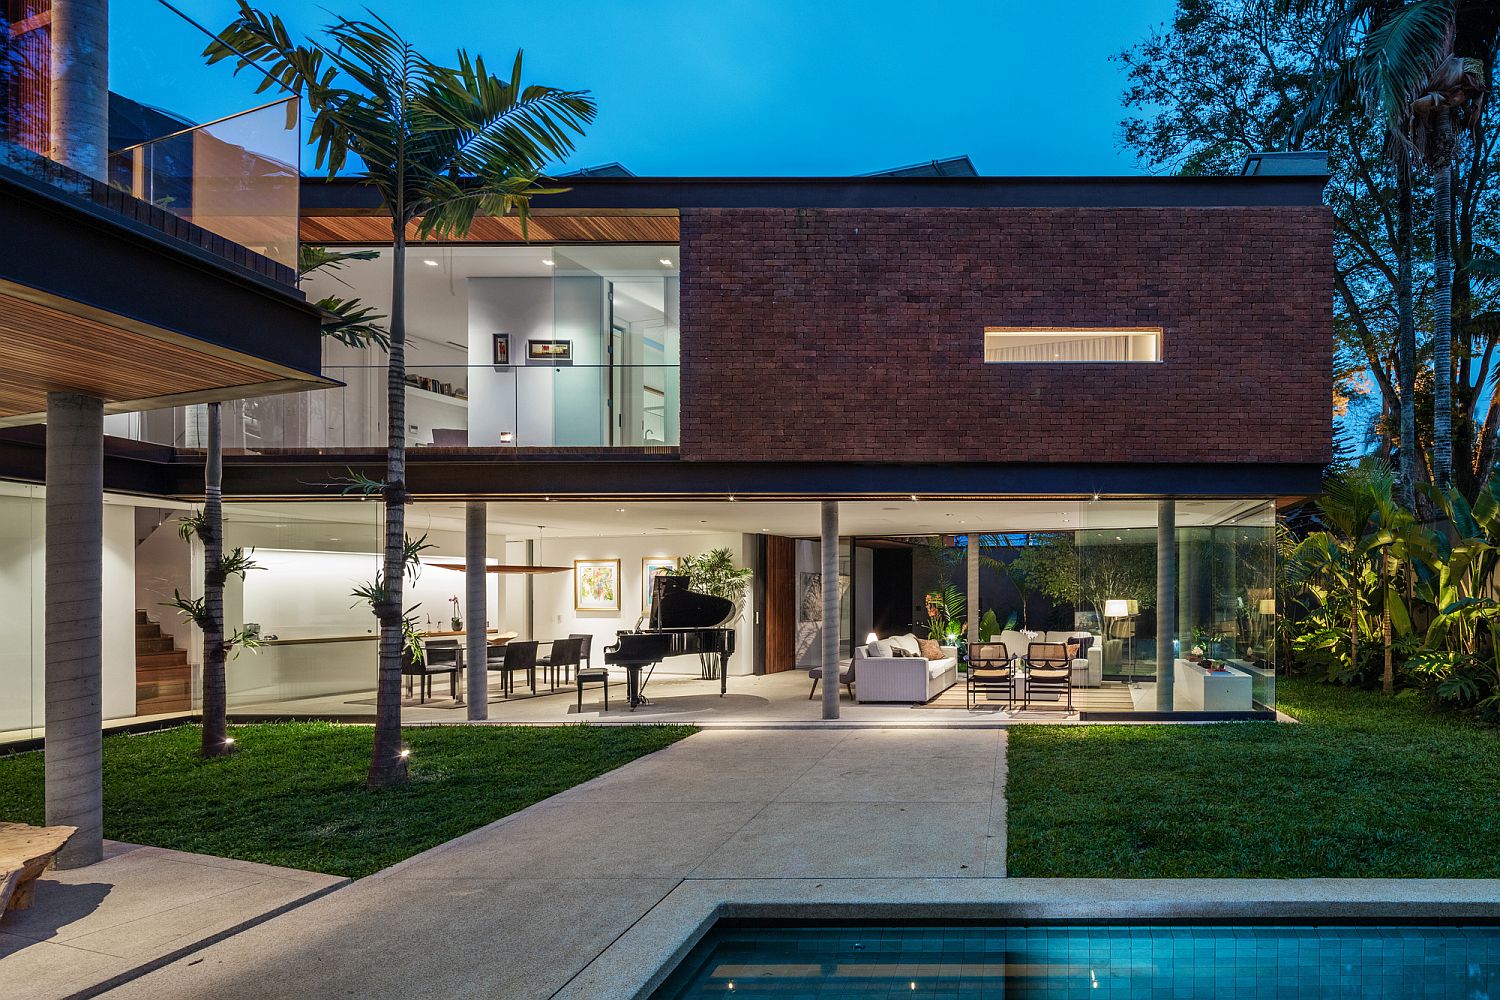 Brick, steel and glass contemporary home in Sao Paulo